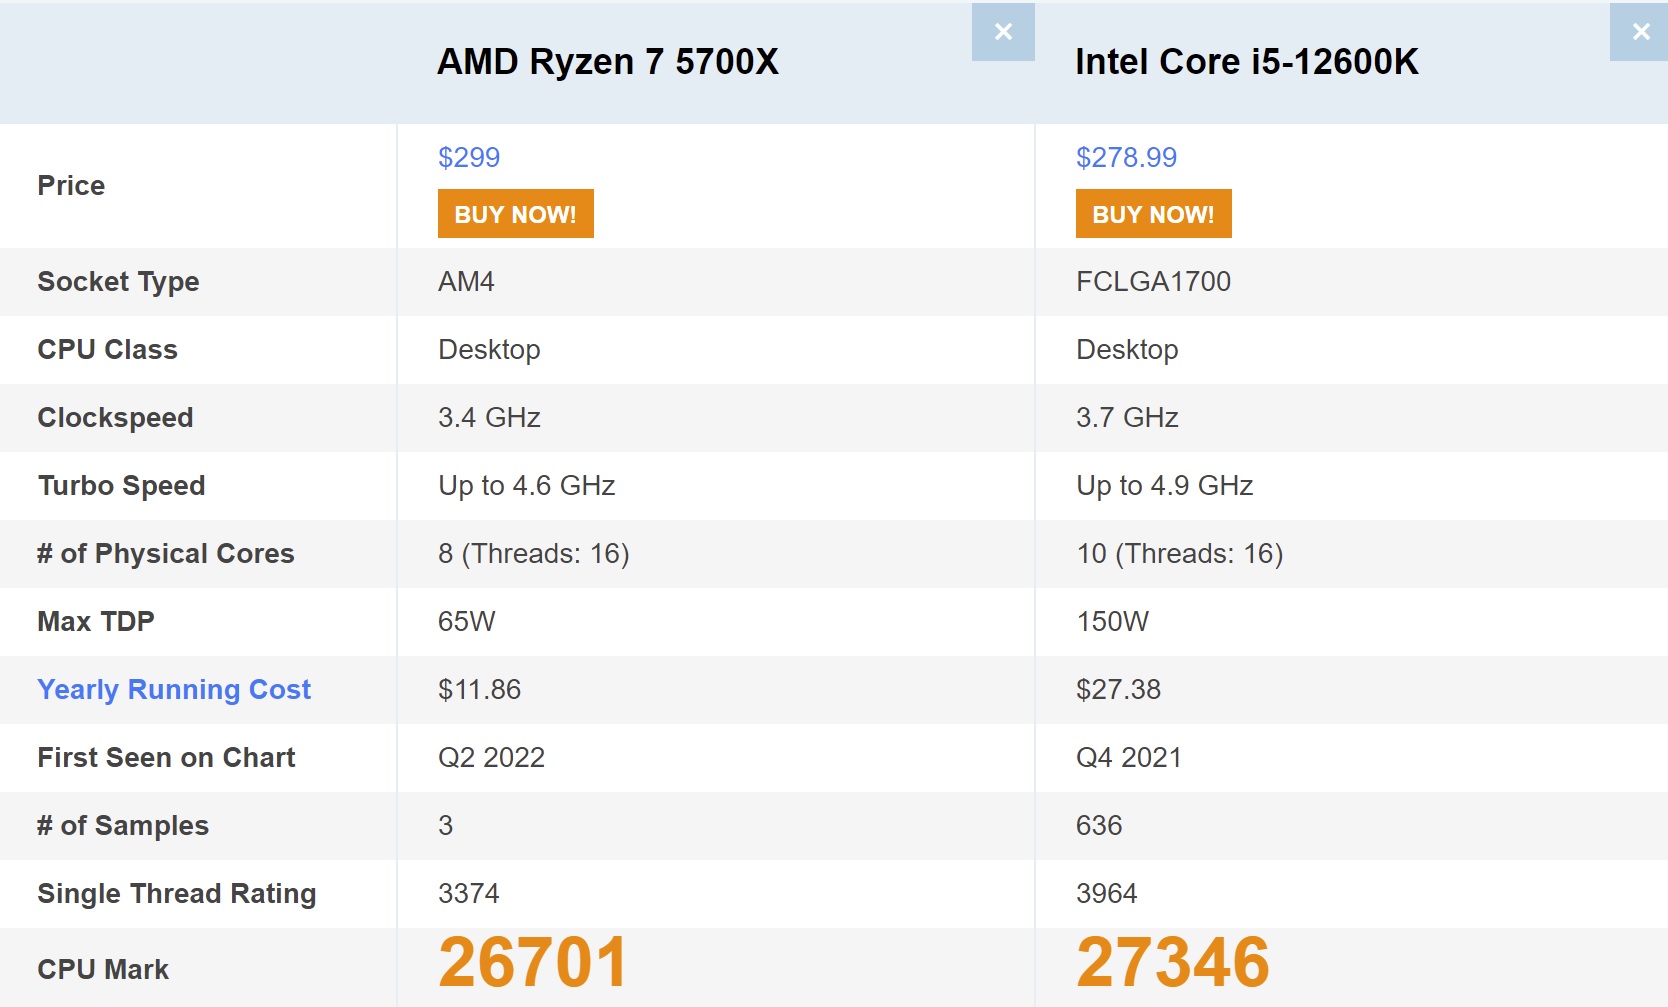 AMD Ryzen 7 5700X compares favorably to Intel Core i5-12600K on